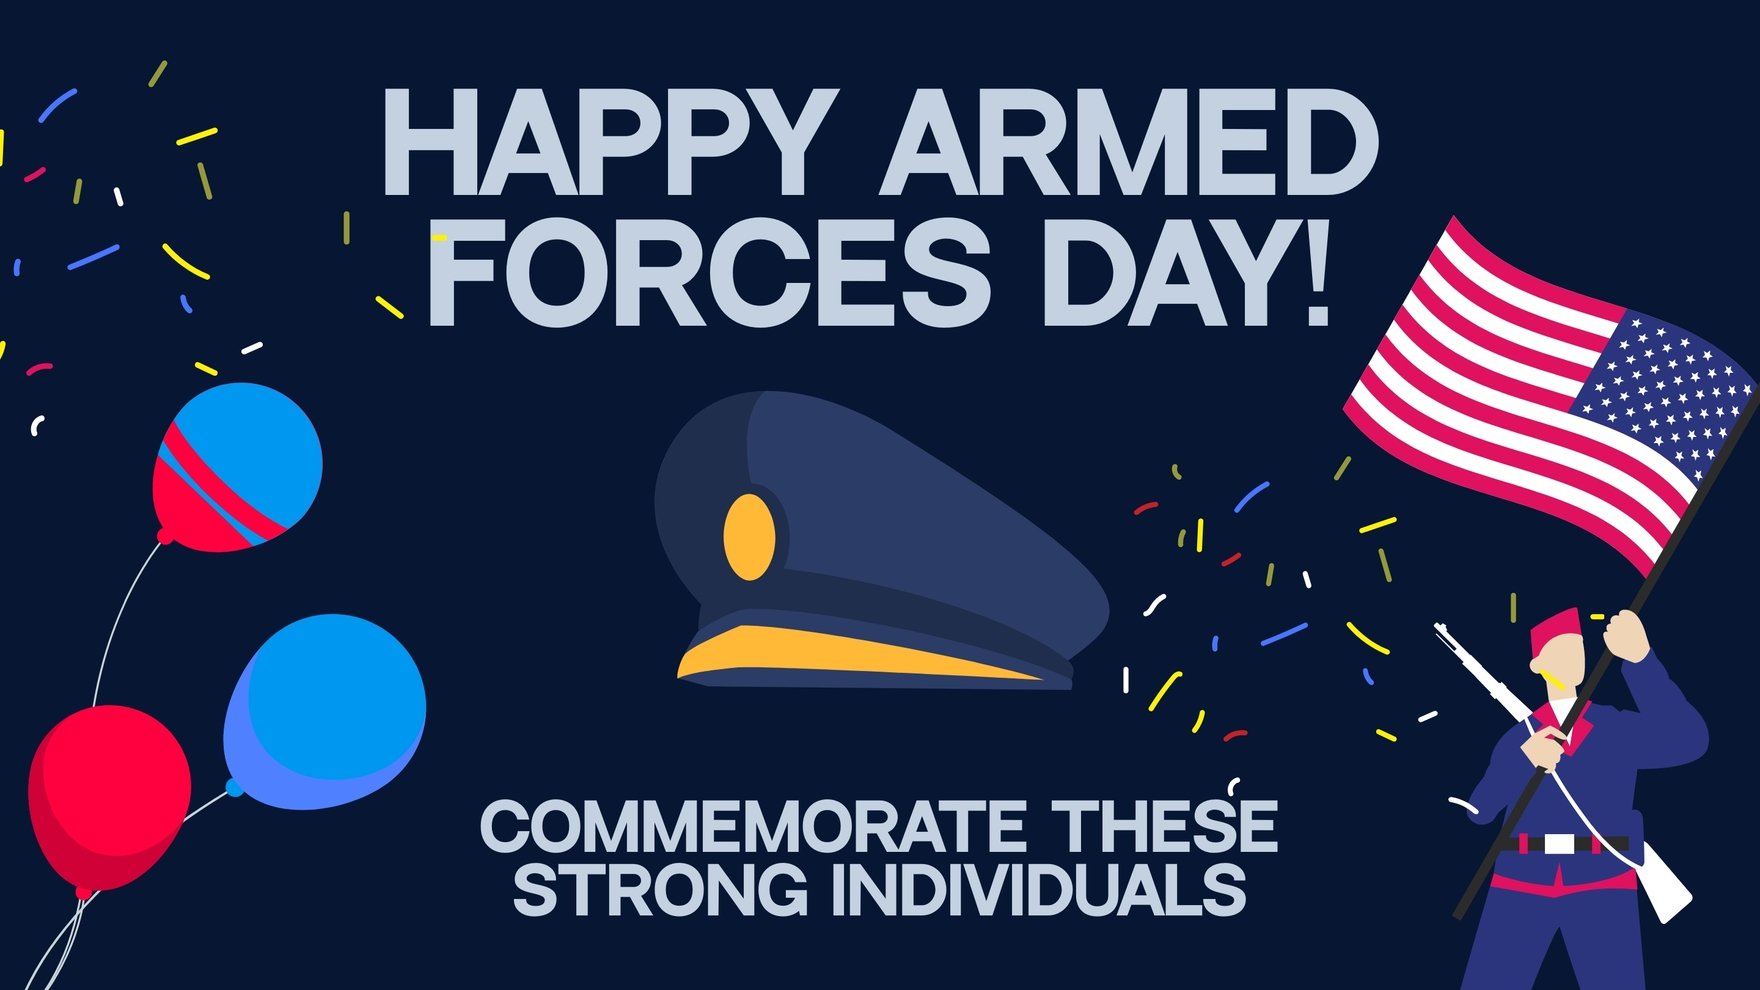 Armed Forces Day Greeting Card Background